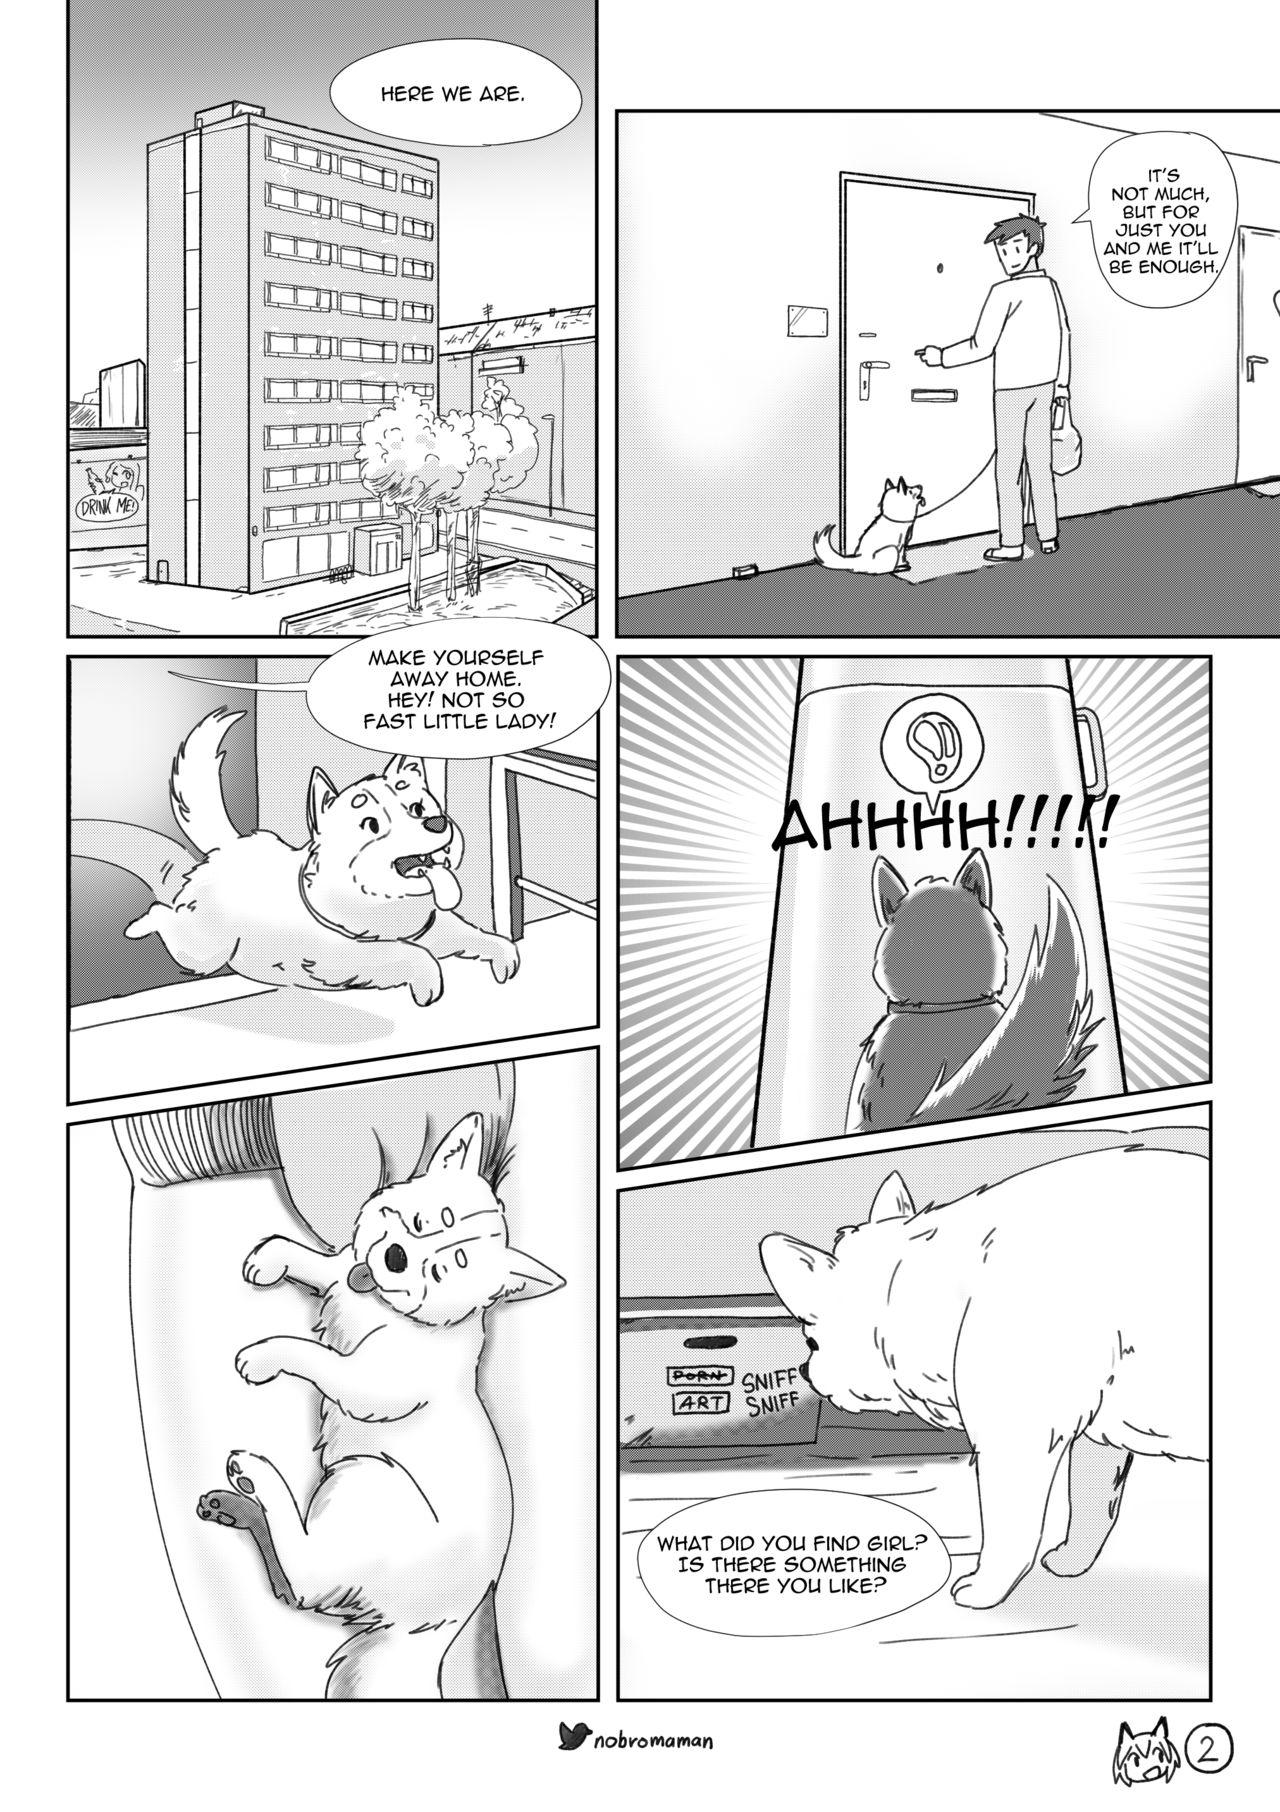 Life with a dog girl - Chapter1 2